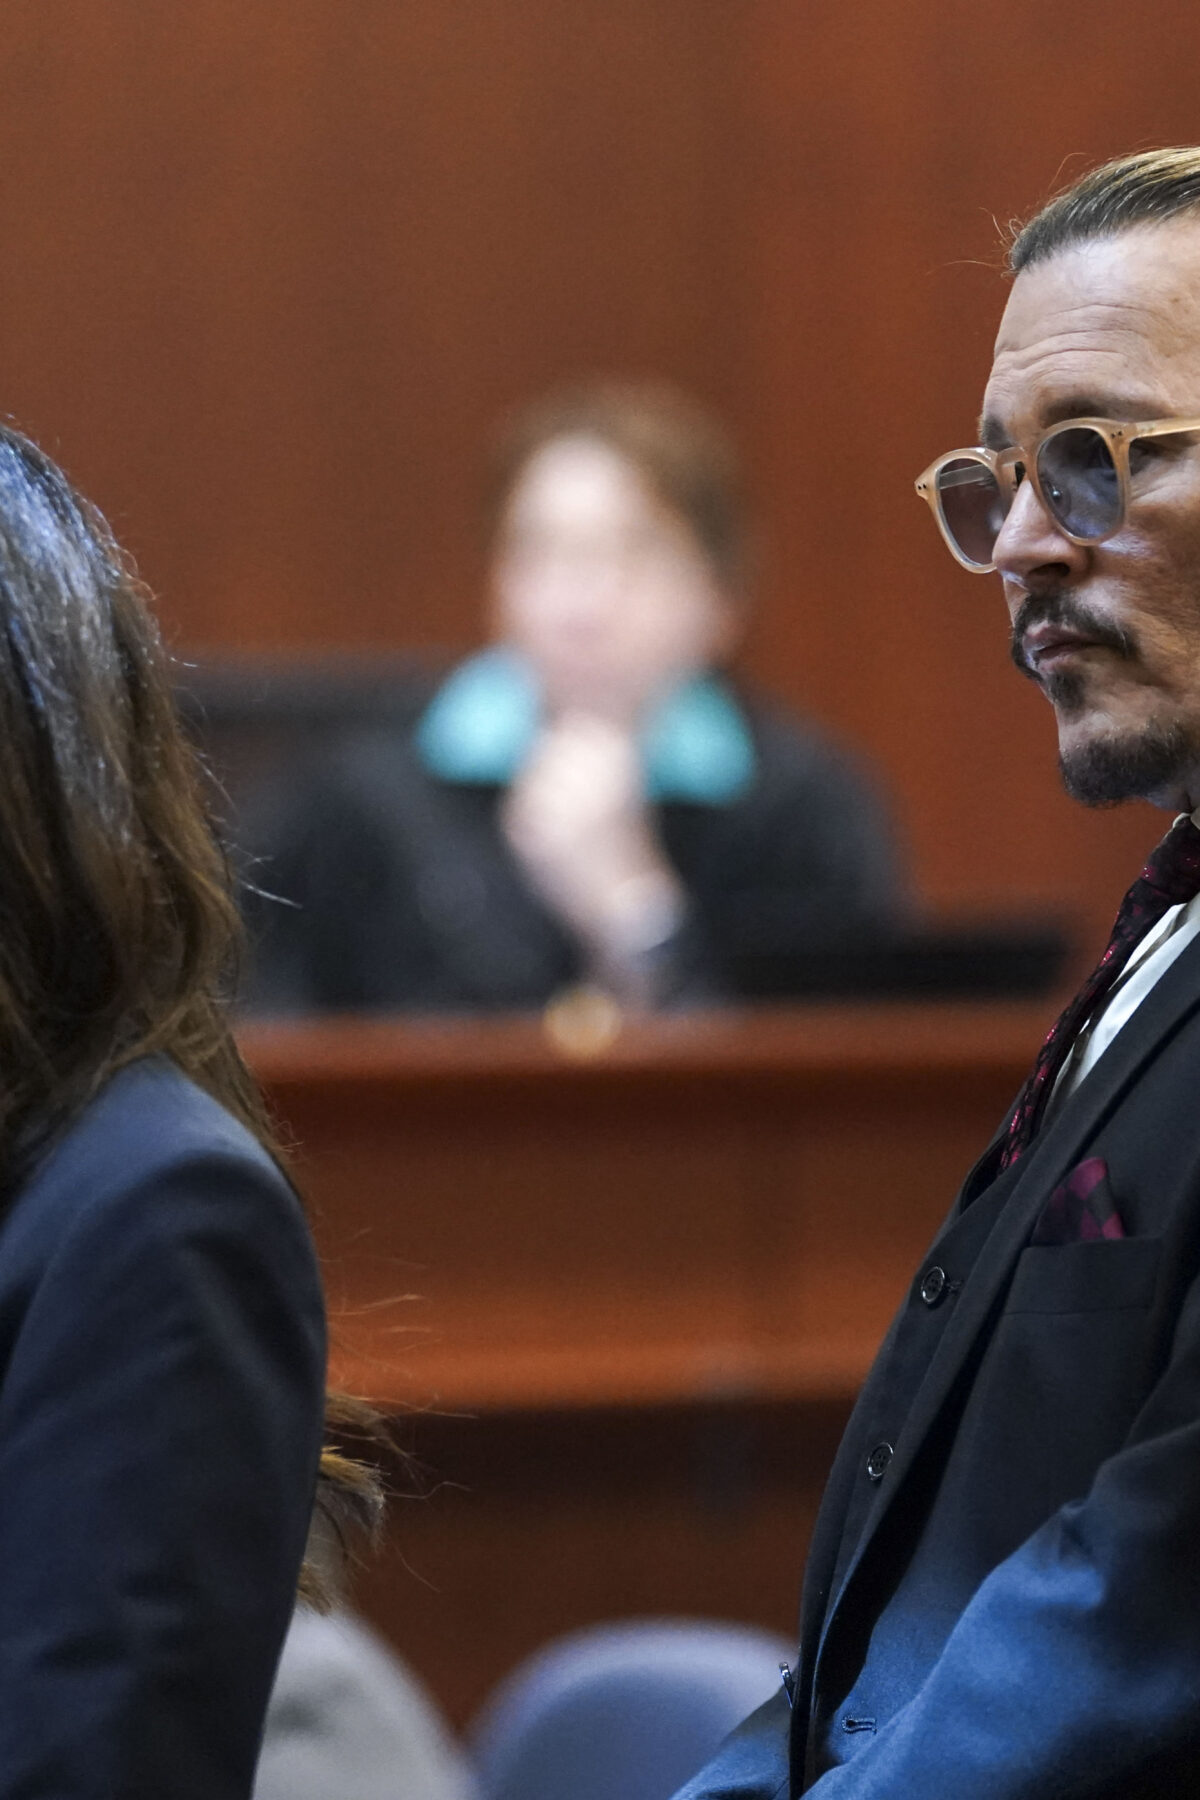 US actor Johnny Depp stands next to his lawyer Camille Vasquez after a break in the defamation trial against ex-wife Amber Heard at the Fairfax County Circuit Courthouse in Fairfax, Virginia, on May 18, 2022. - Depp is suing ex-wife Amber Heard for libel after she wrote an op-ed piece in The Washington Post in 2018 referring to herself as a public figure representing domestic abuse. (Photo by KEVIN LAMARQUE / POOL / AFP) (Photo by KEVIN LAMARQUE/POOL/AFP via Getty Images)